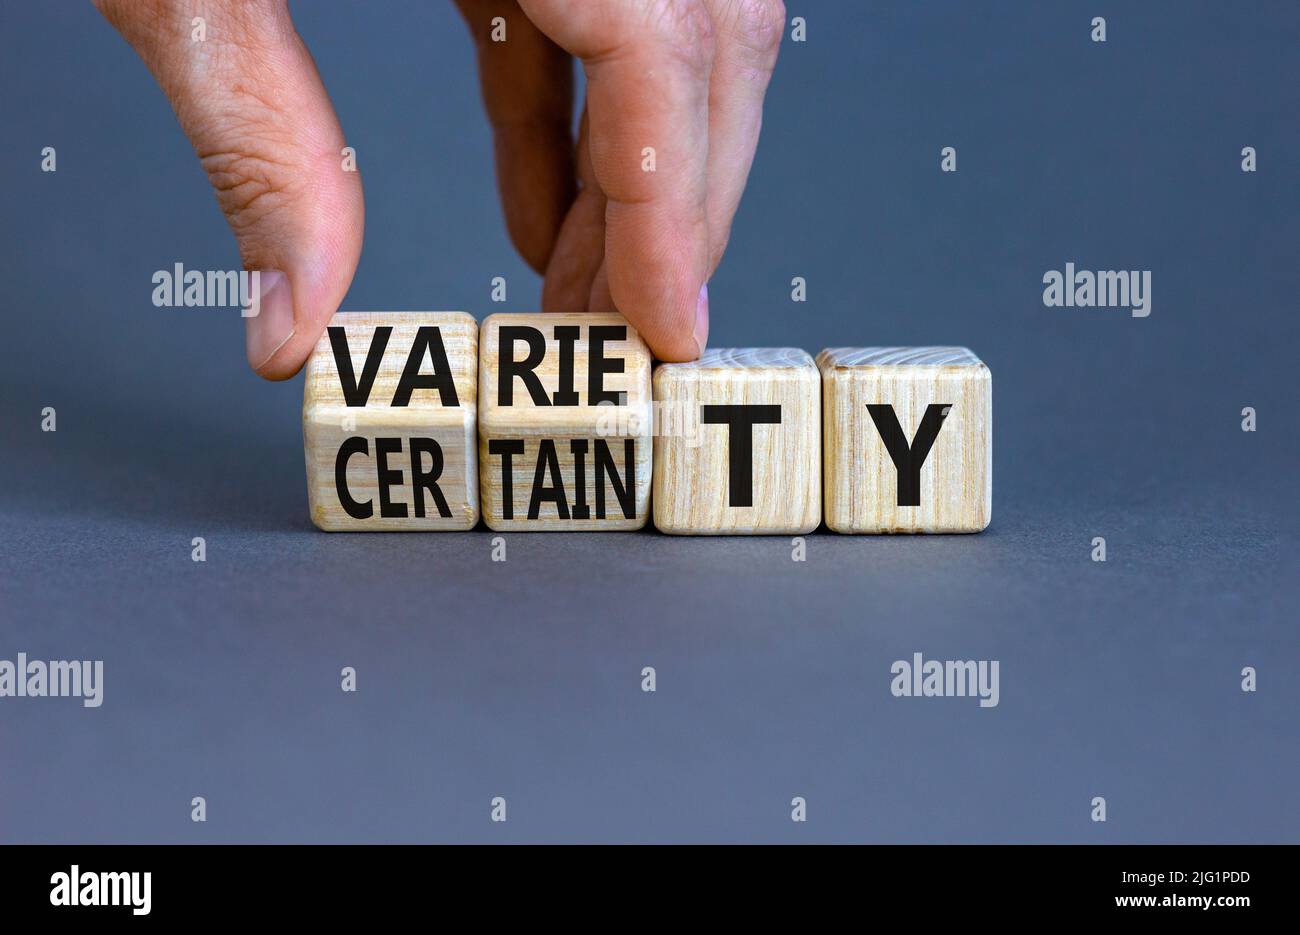 Variety or certainty symbol. Concept words Variety or certainty on wooden cubes. Businessman hand. Beautiful grey table grey background. Business vari Stock Photo